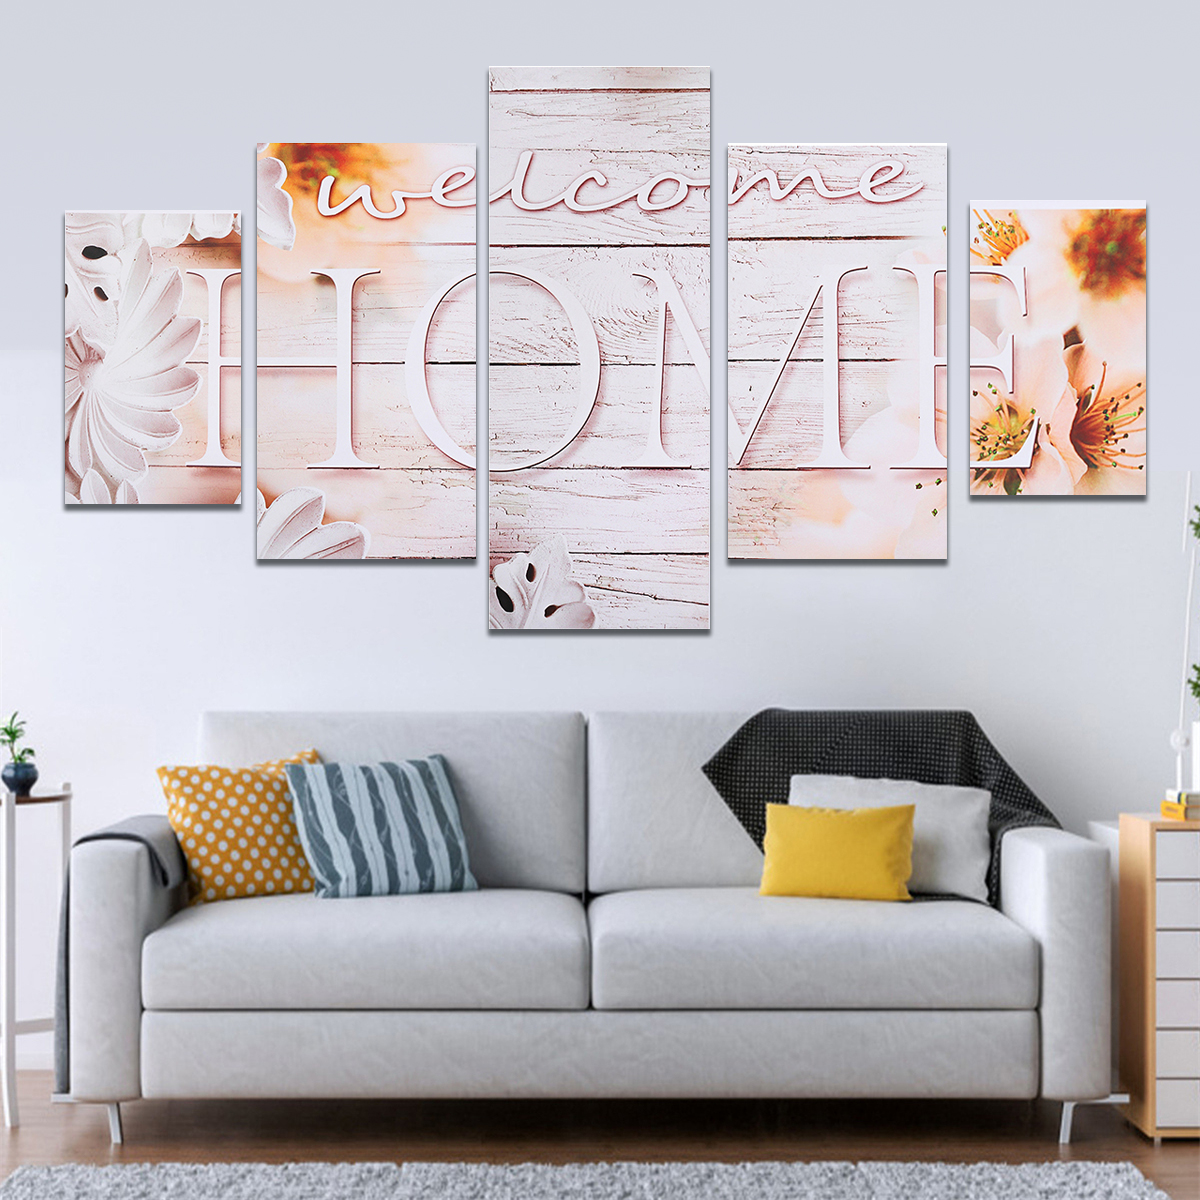 5Pcs-Canvas-Paintings-Love-HOME-Wall-Decorative-Print-Art-Pictures-Unframed-Wall-Hanging-Home-Office-1785063-7